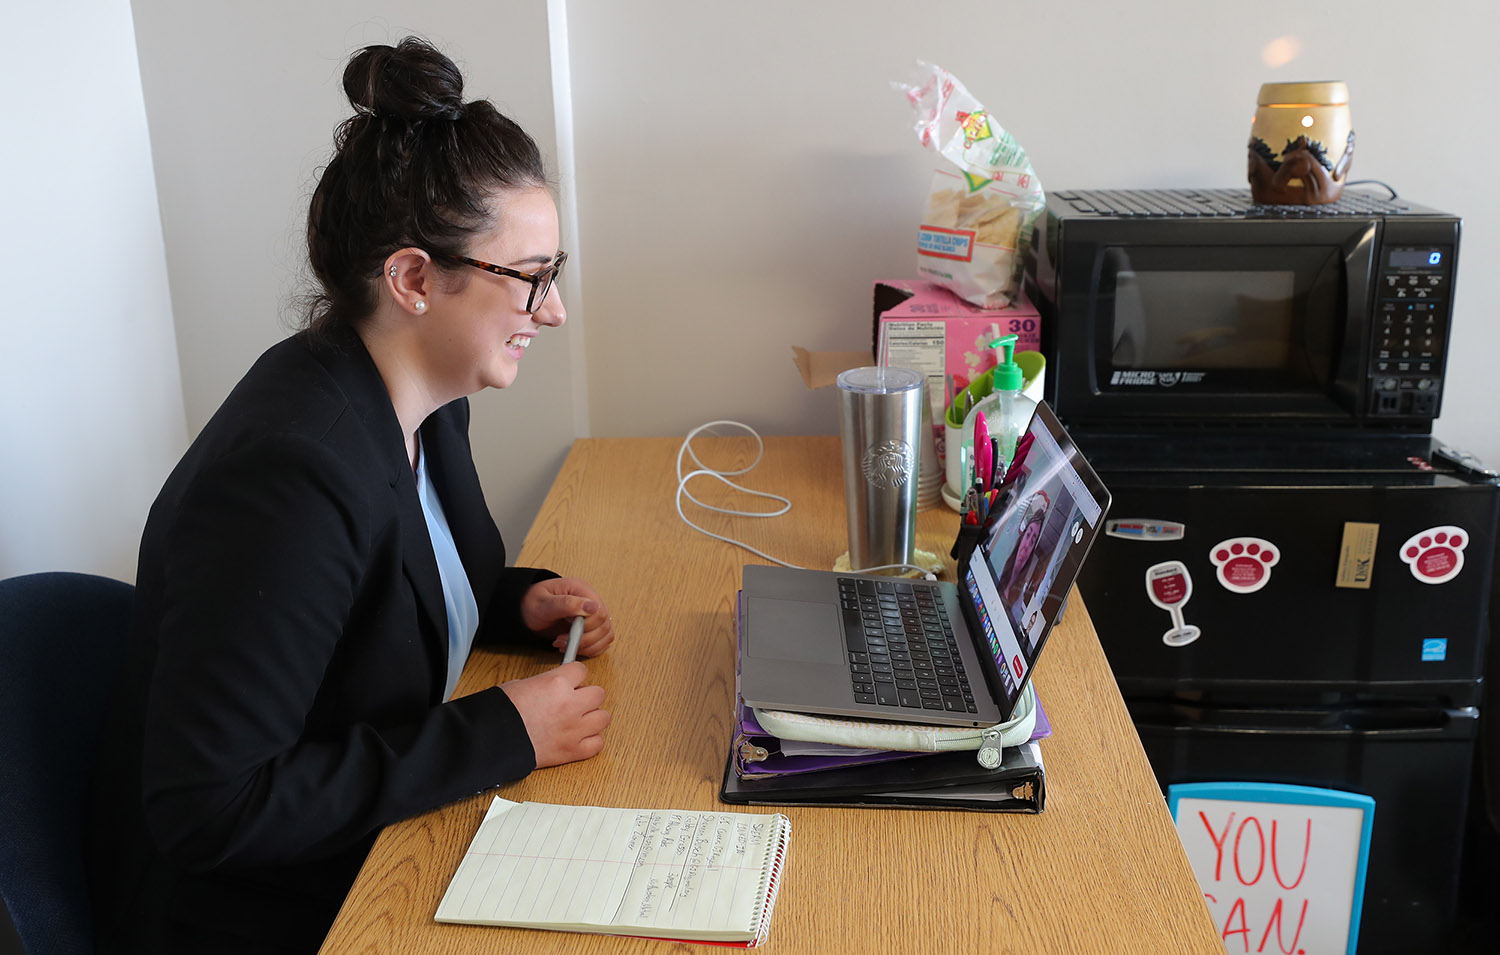 Ashley Einspahr participates in Thursday’s virtual Career and Internship Fair from her residence hall room on the UNK campus. The senior from Arcadia met with employers from across the state. (Photos by Erika Pritchard, UNK Communications)